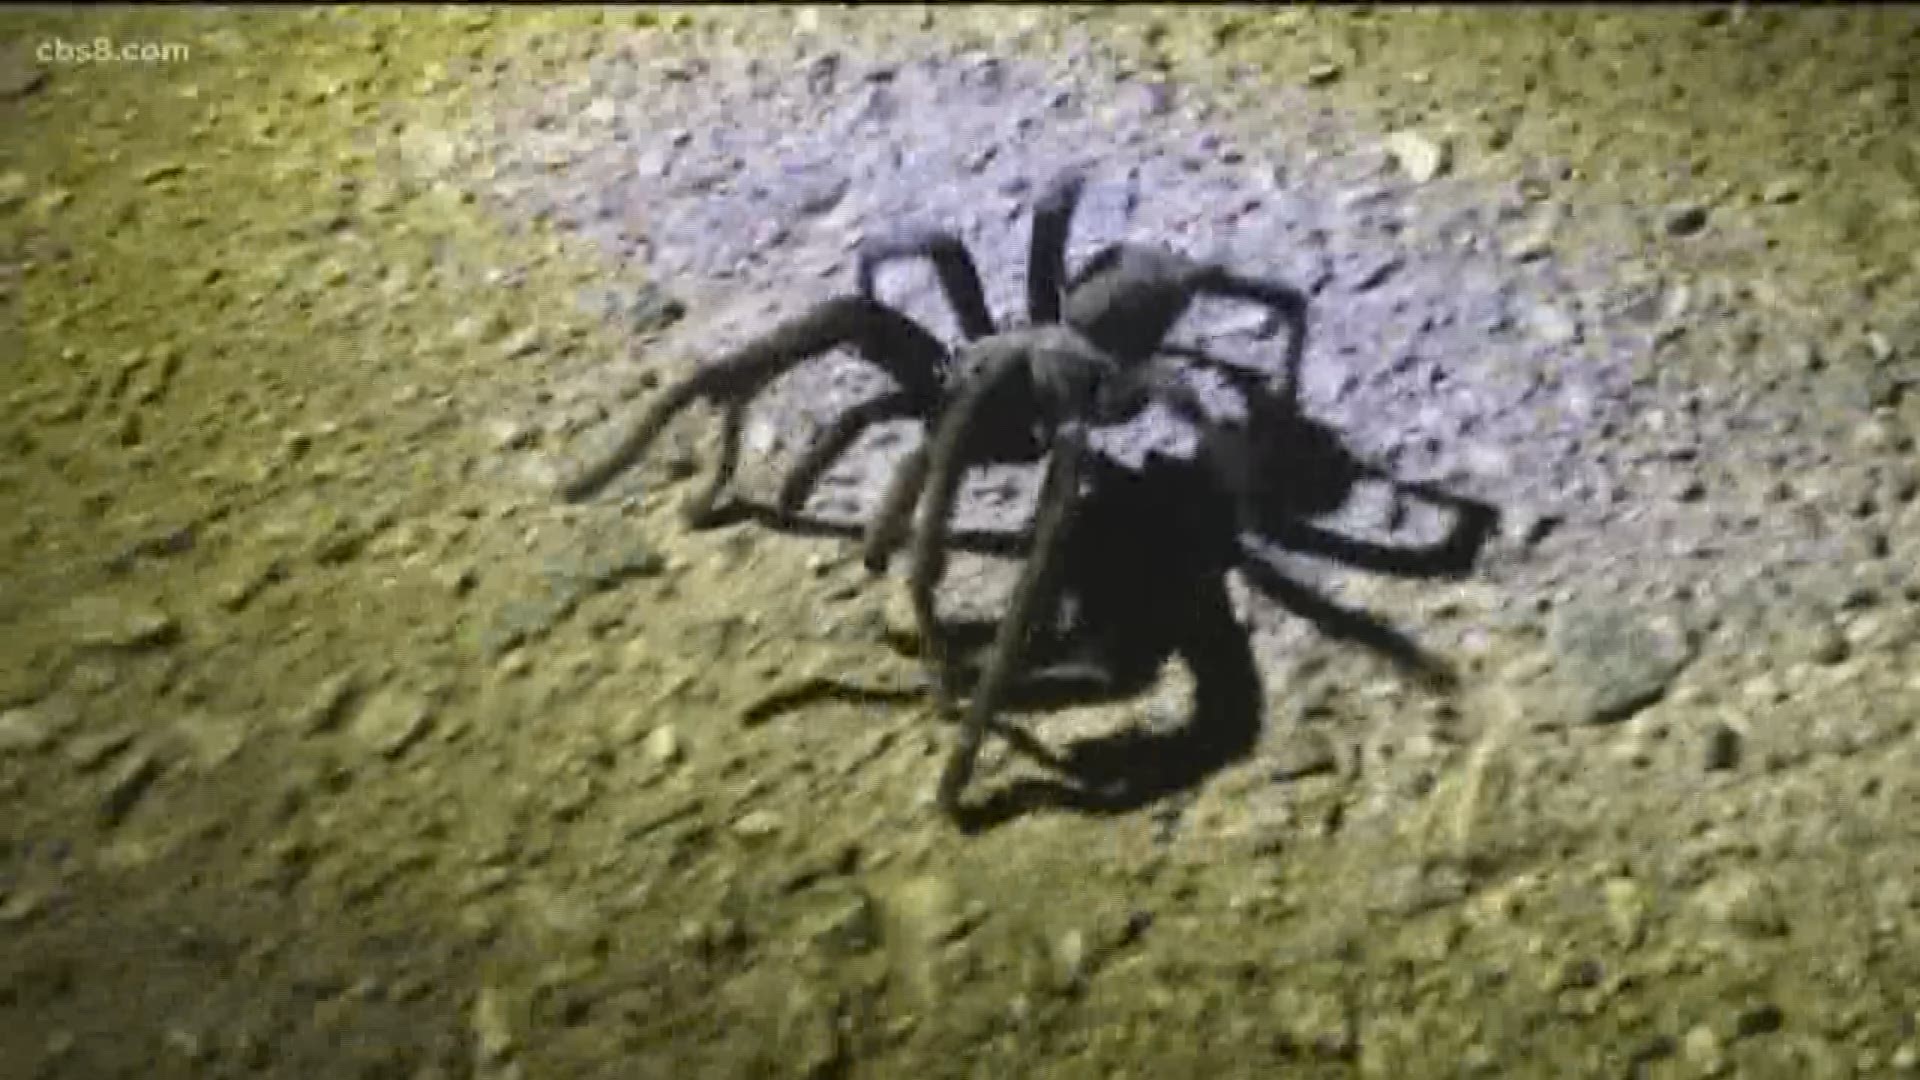 You may or may not know, but tarantulas are part of San Diego and they are on the move. Why? Because males are looking for females to mate with, but in typical male fashion, some are a little lost. News 8's Shawn Styles explains in this Earth 8 report.